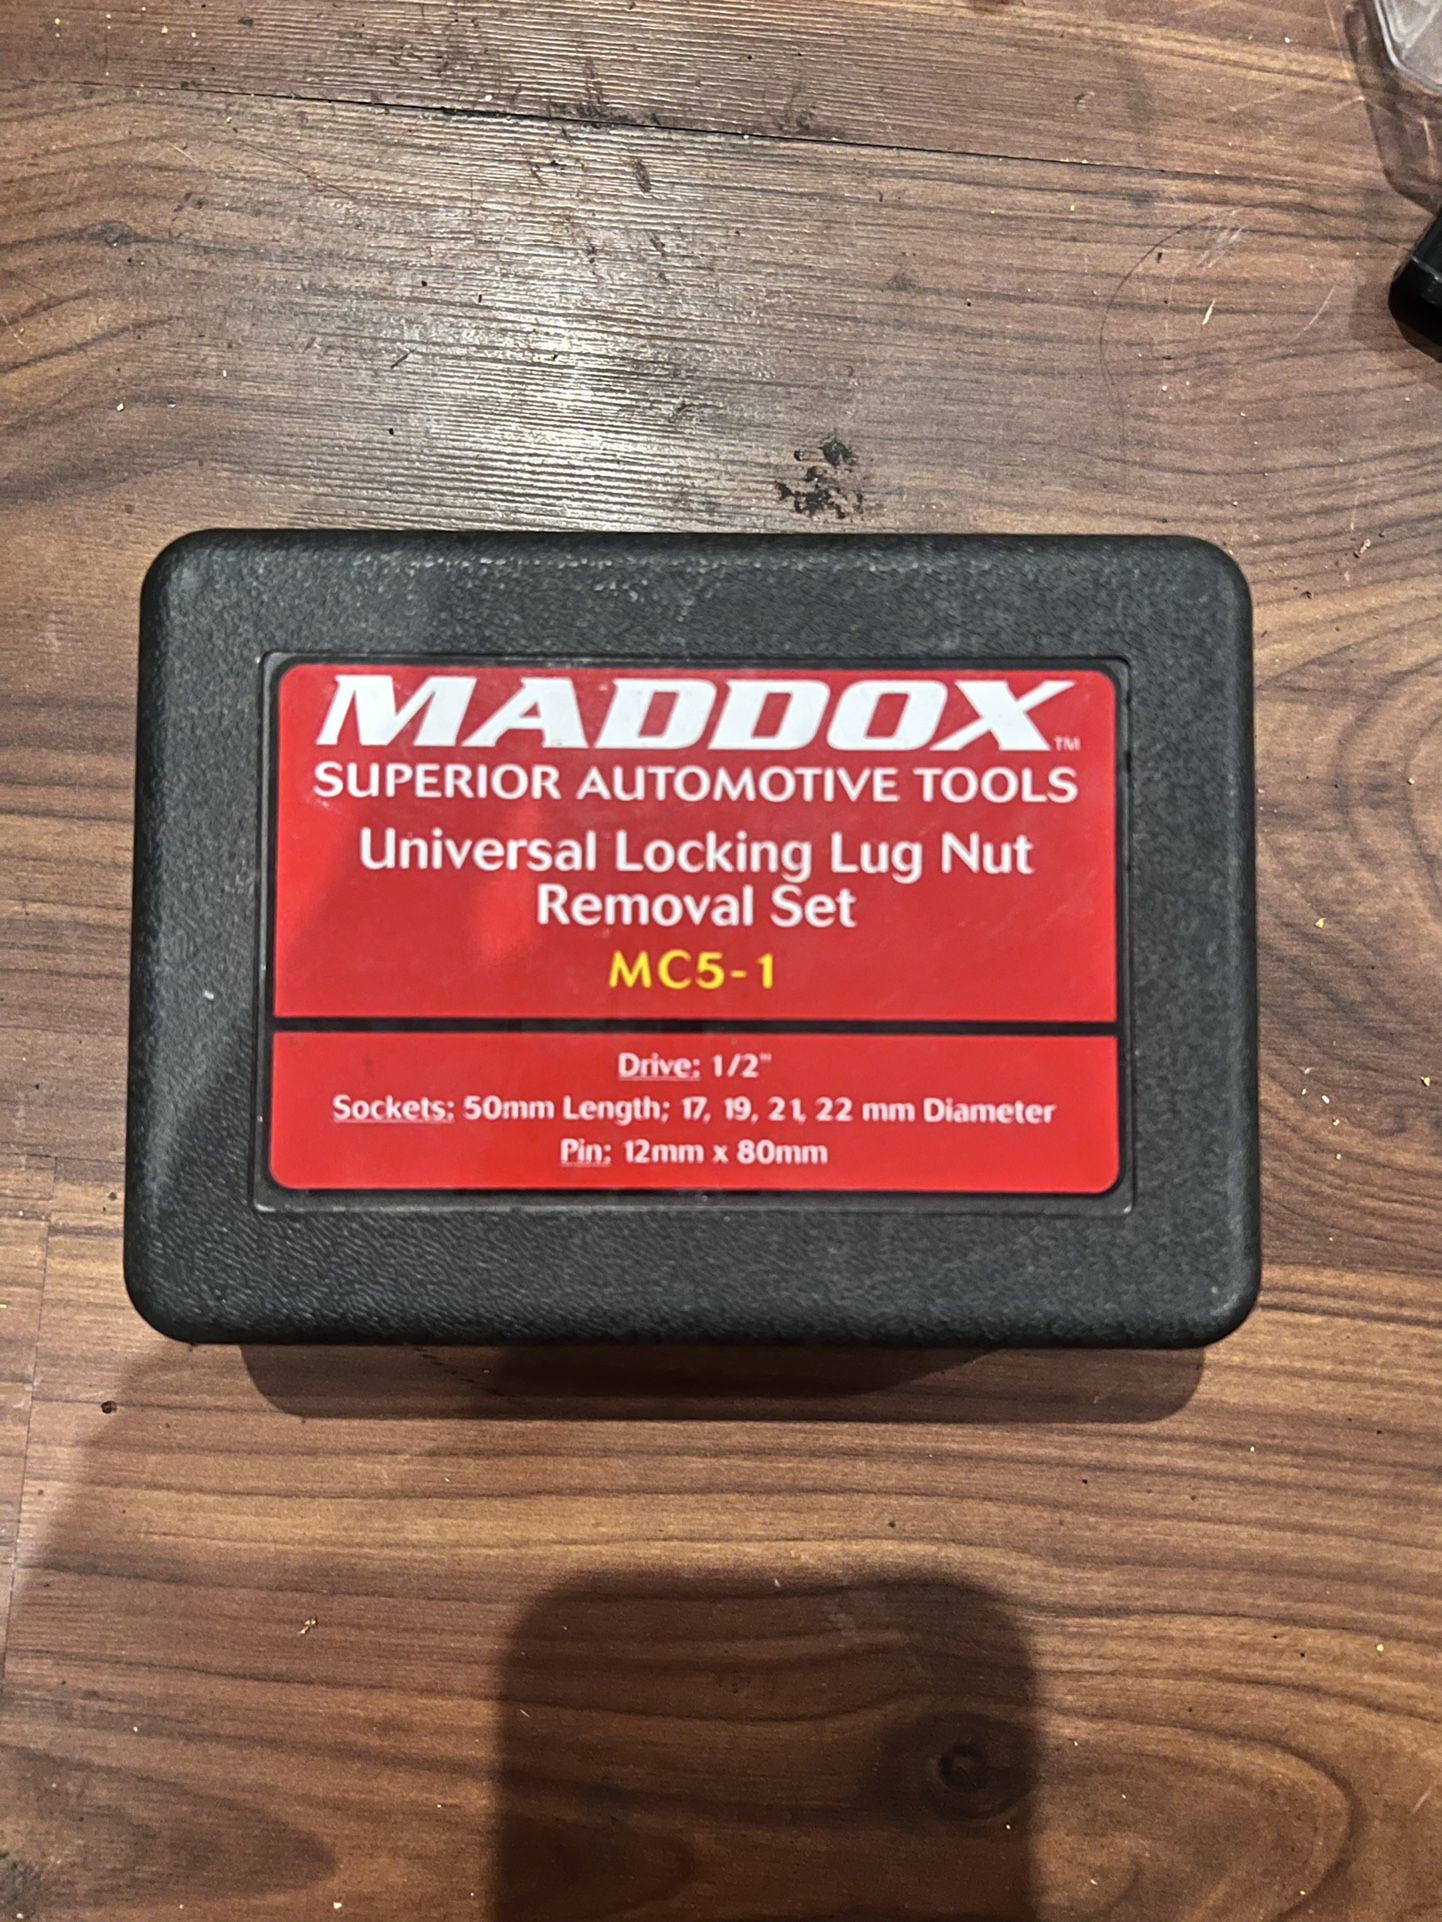 Maddox Universal Locking Lugnut Removal Set (pickup in NOLA only) $30